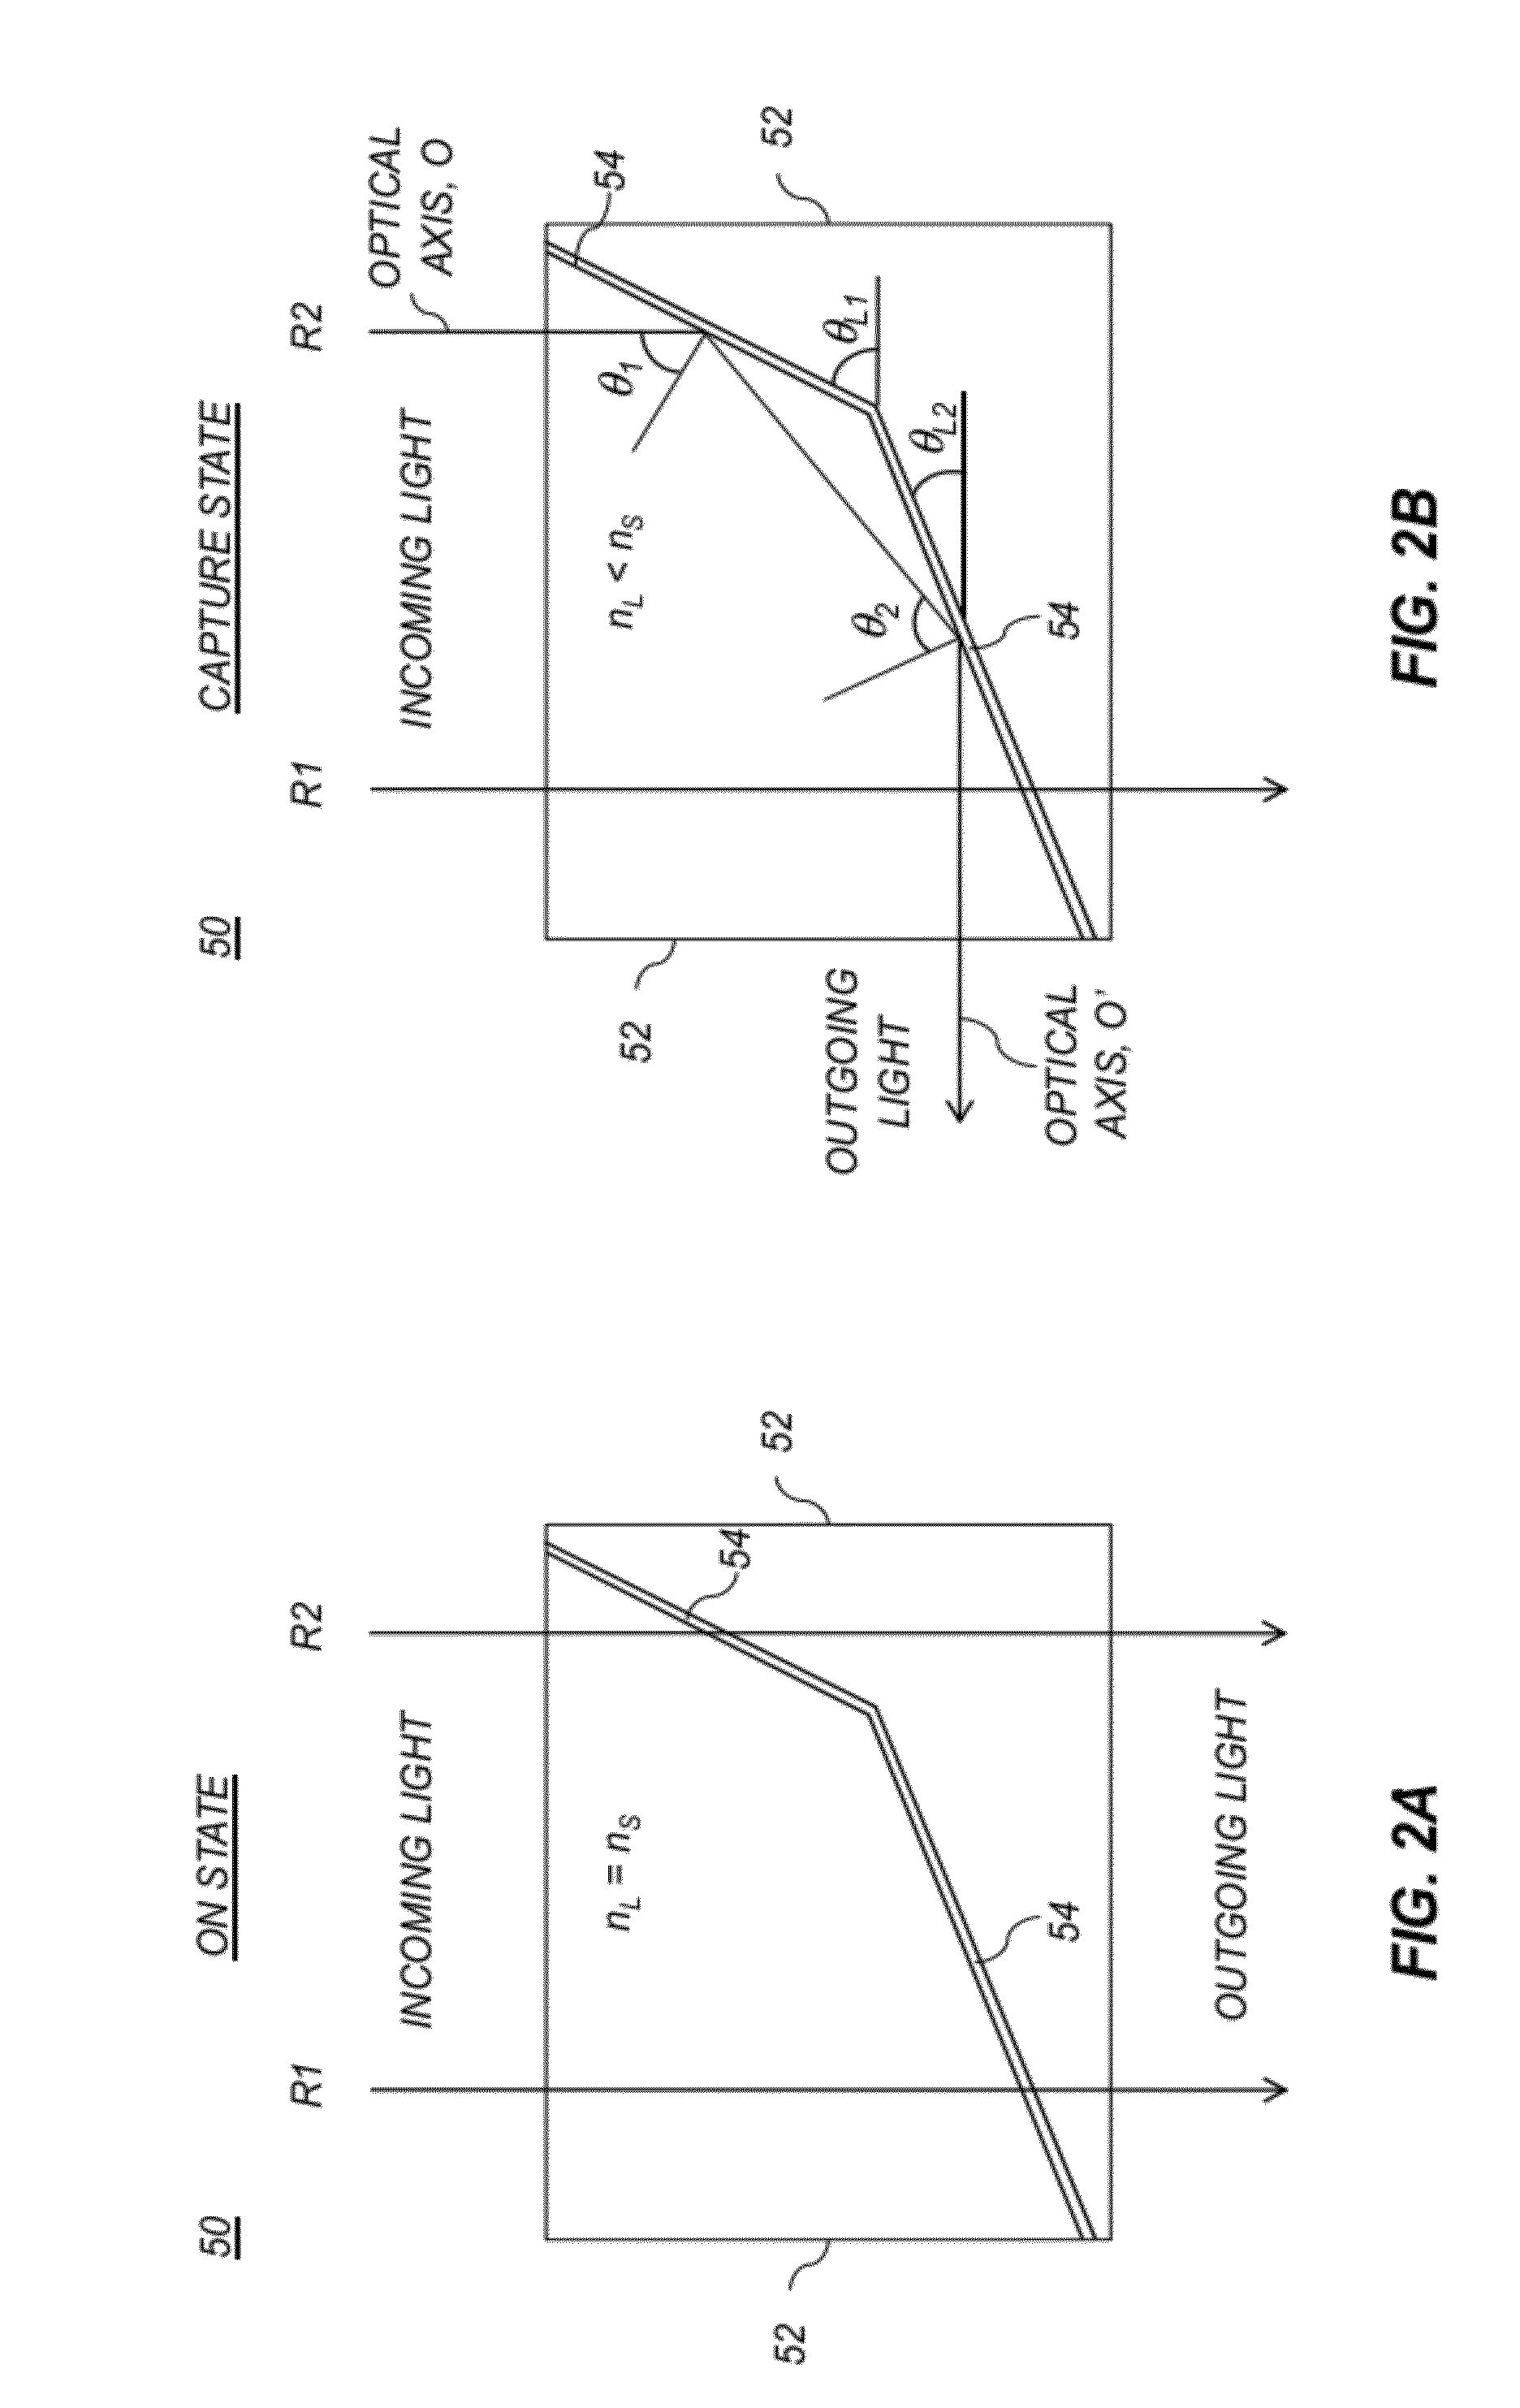 Capturing images using a switchable imaging apparatus